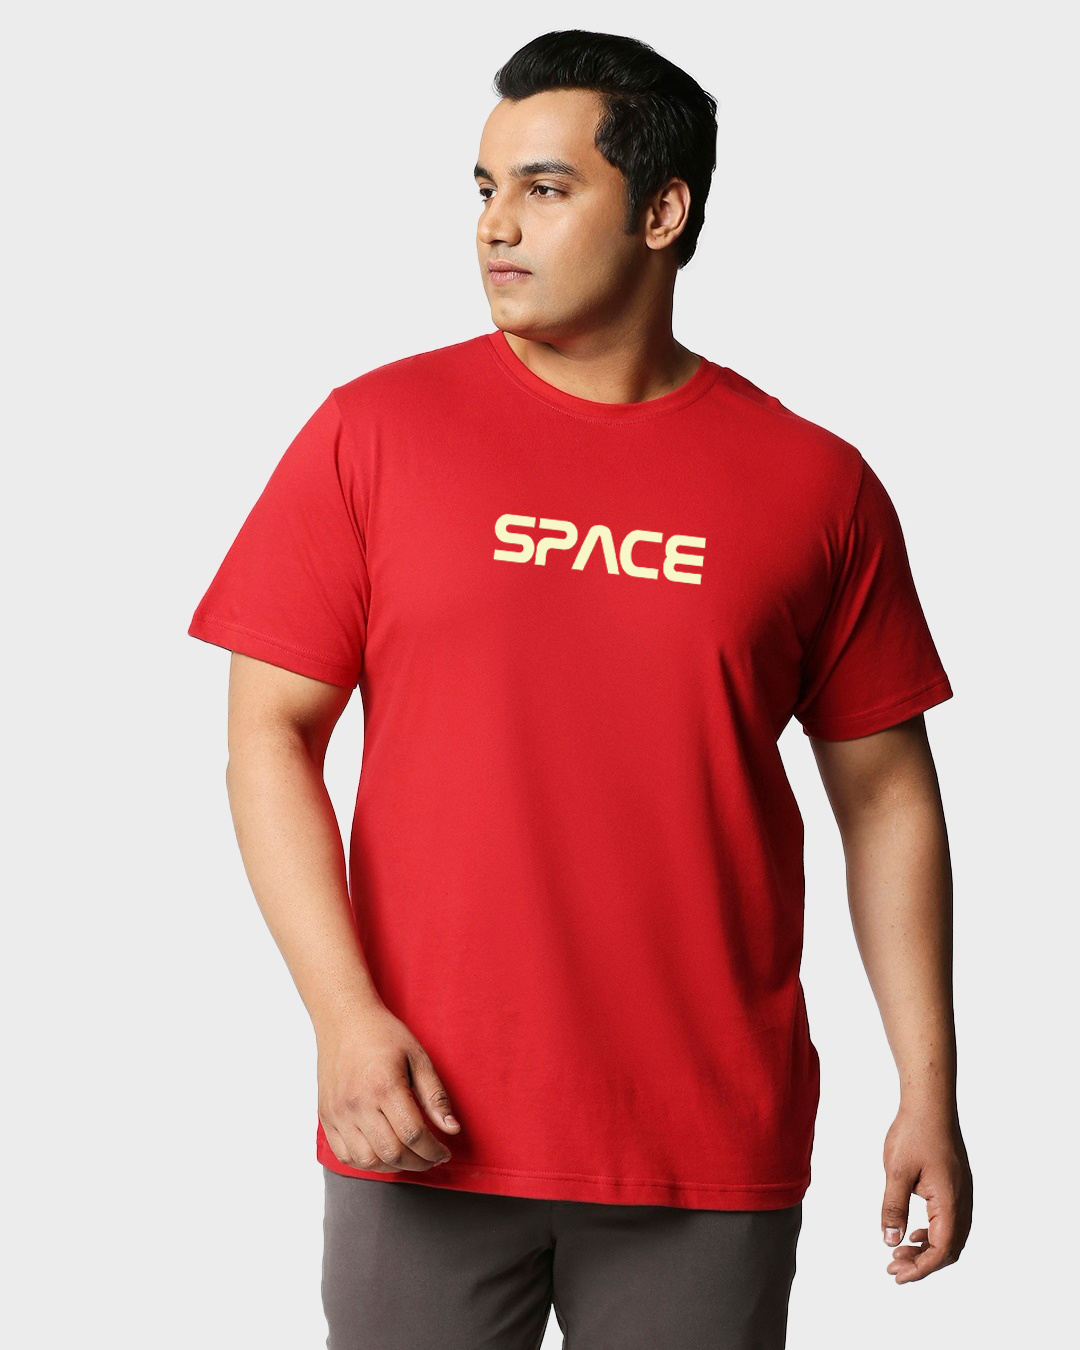 Buy Men's Red Limited Edition Graphic Printed Oversized Plus Size T ...